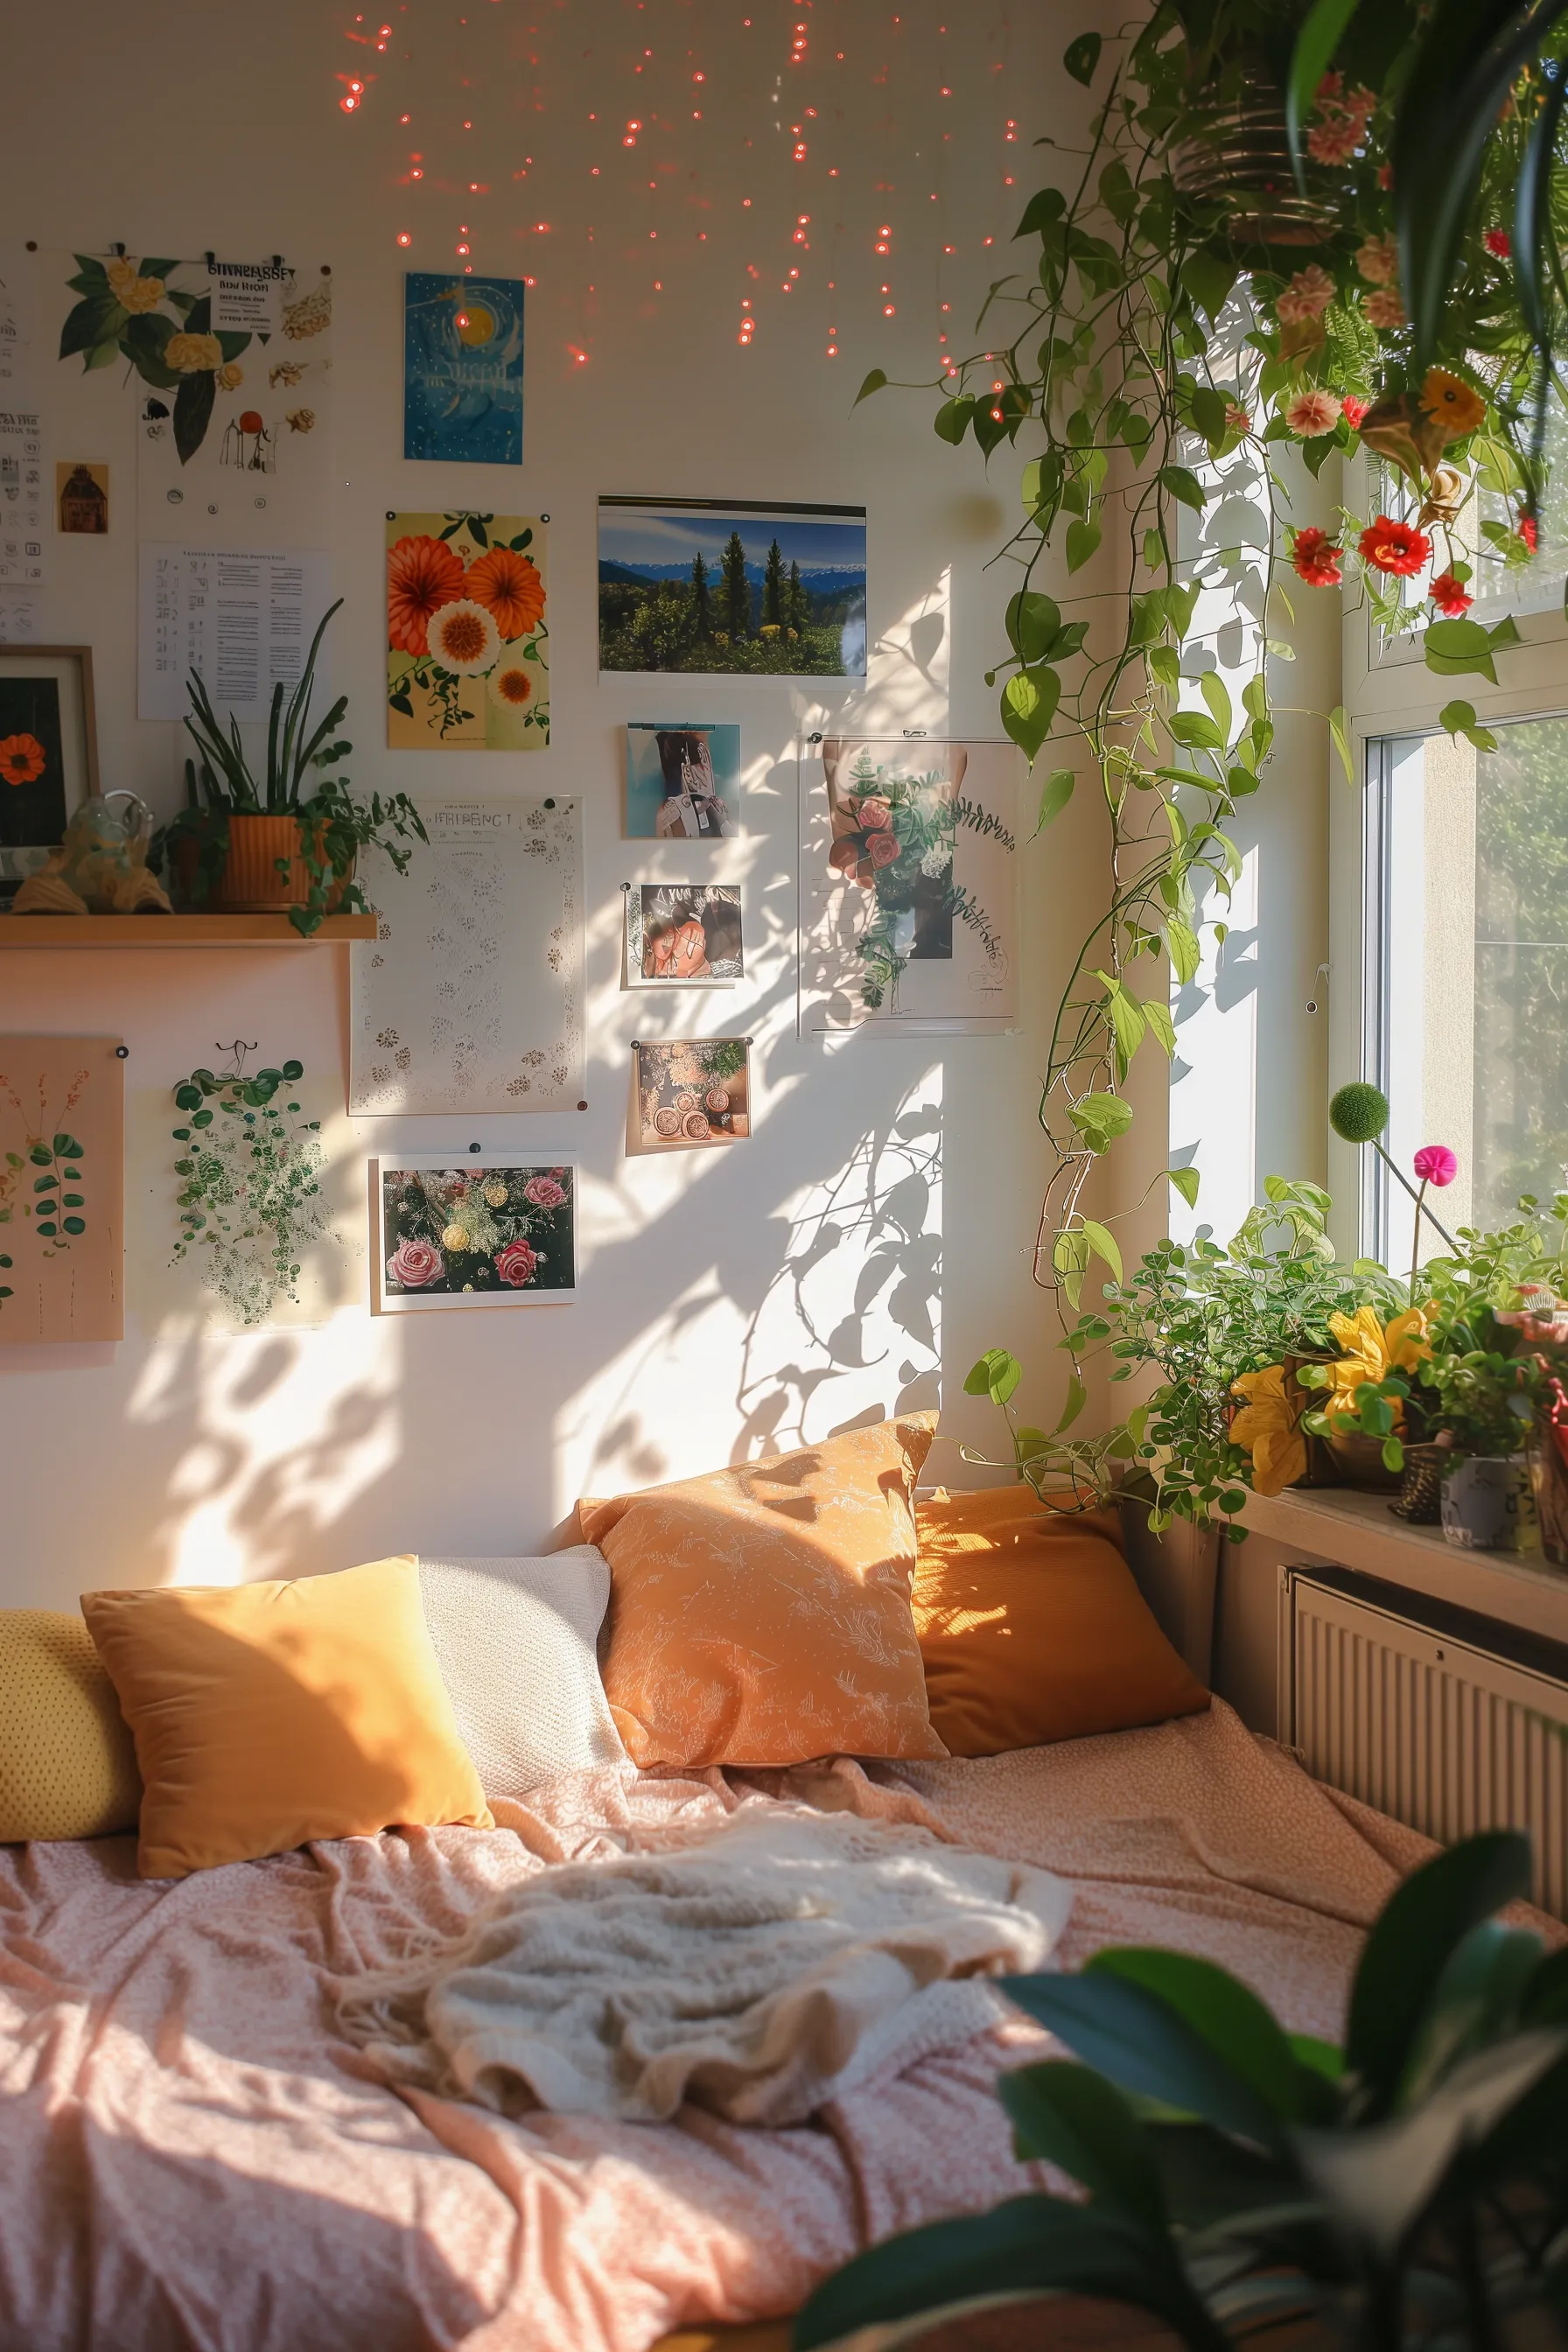 An orange and white bed with lots of photos and plants